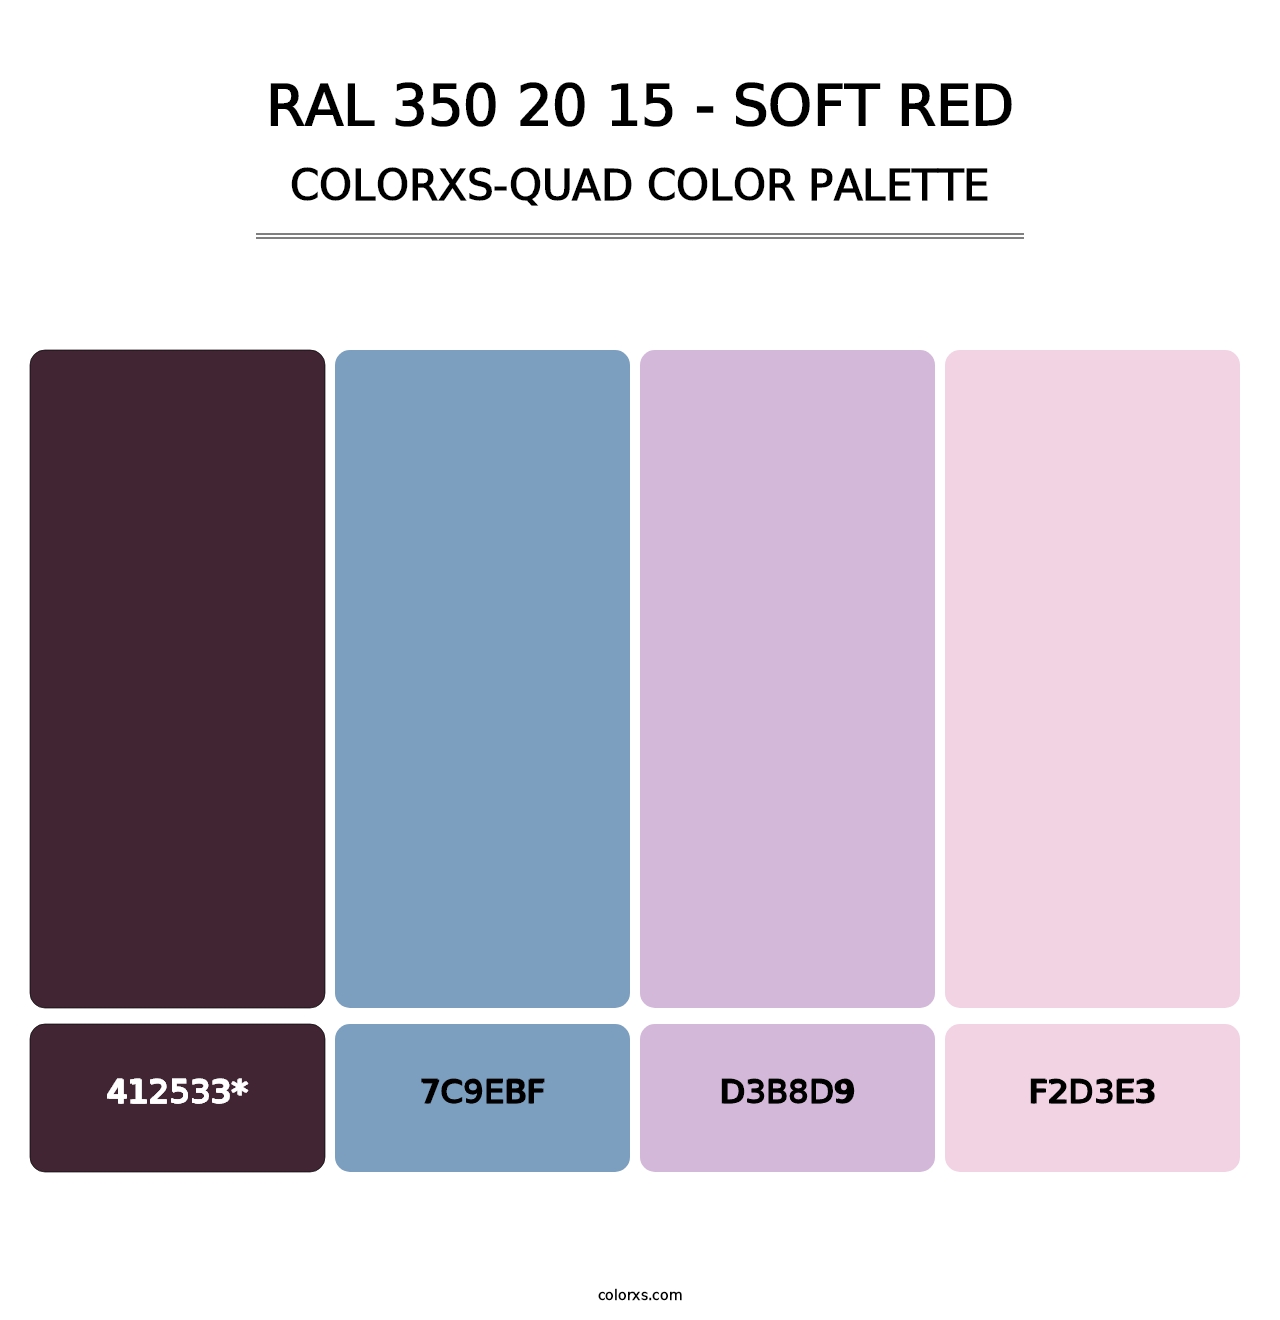 RAL 350 20 15 - Soft Red - Colorxs Quad Palette